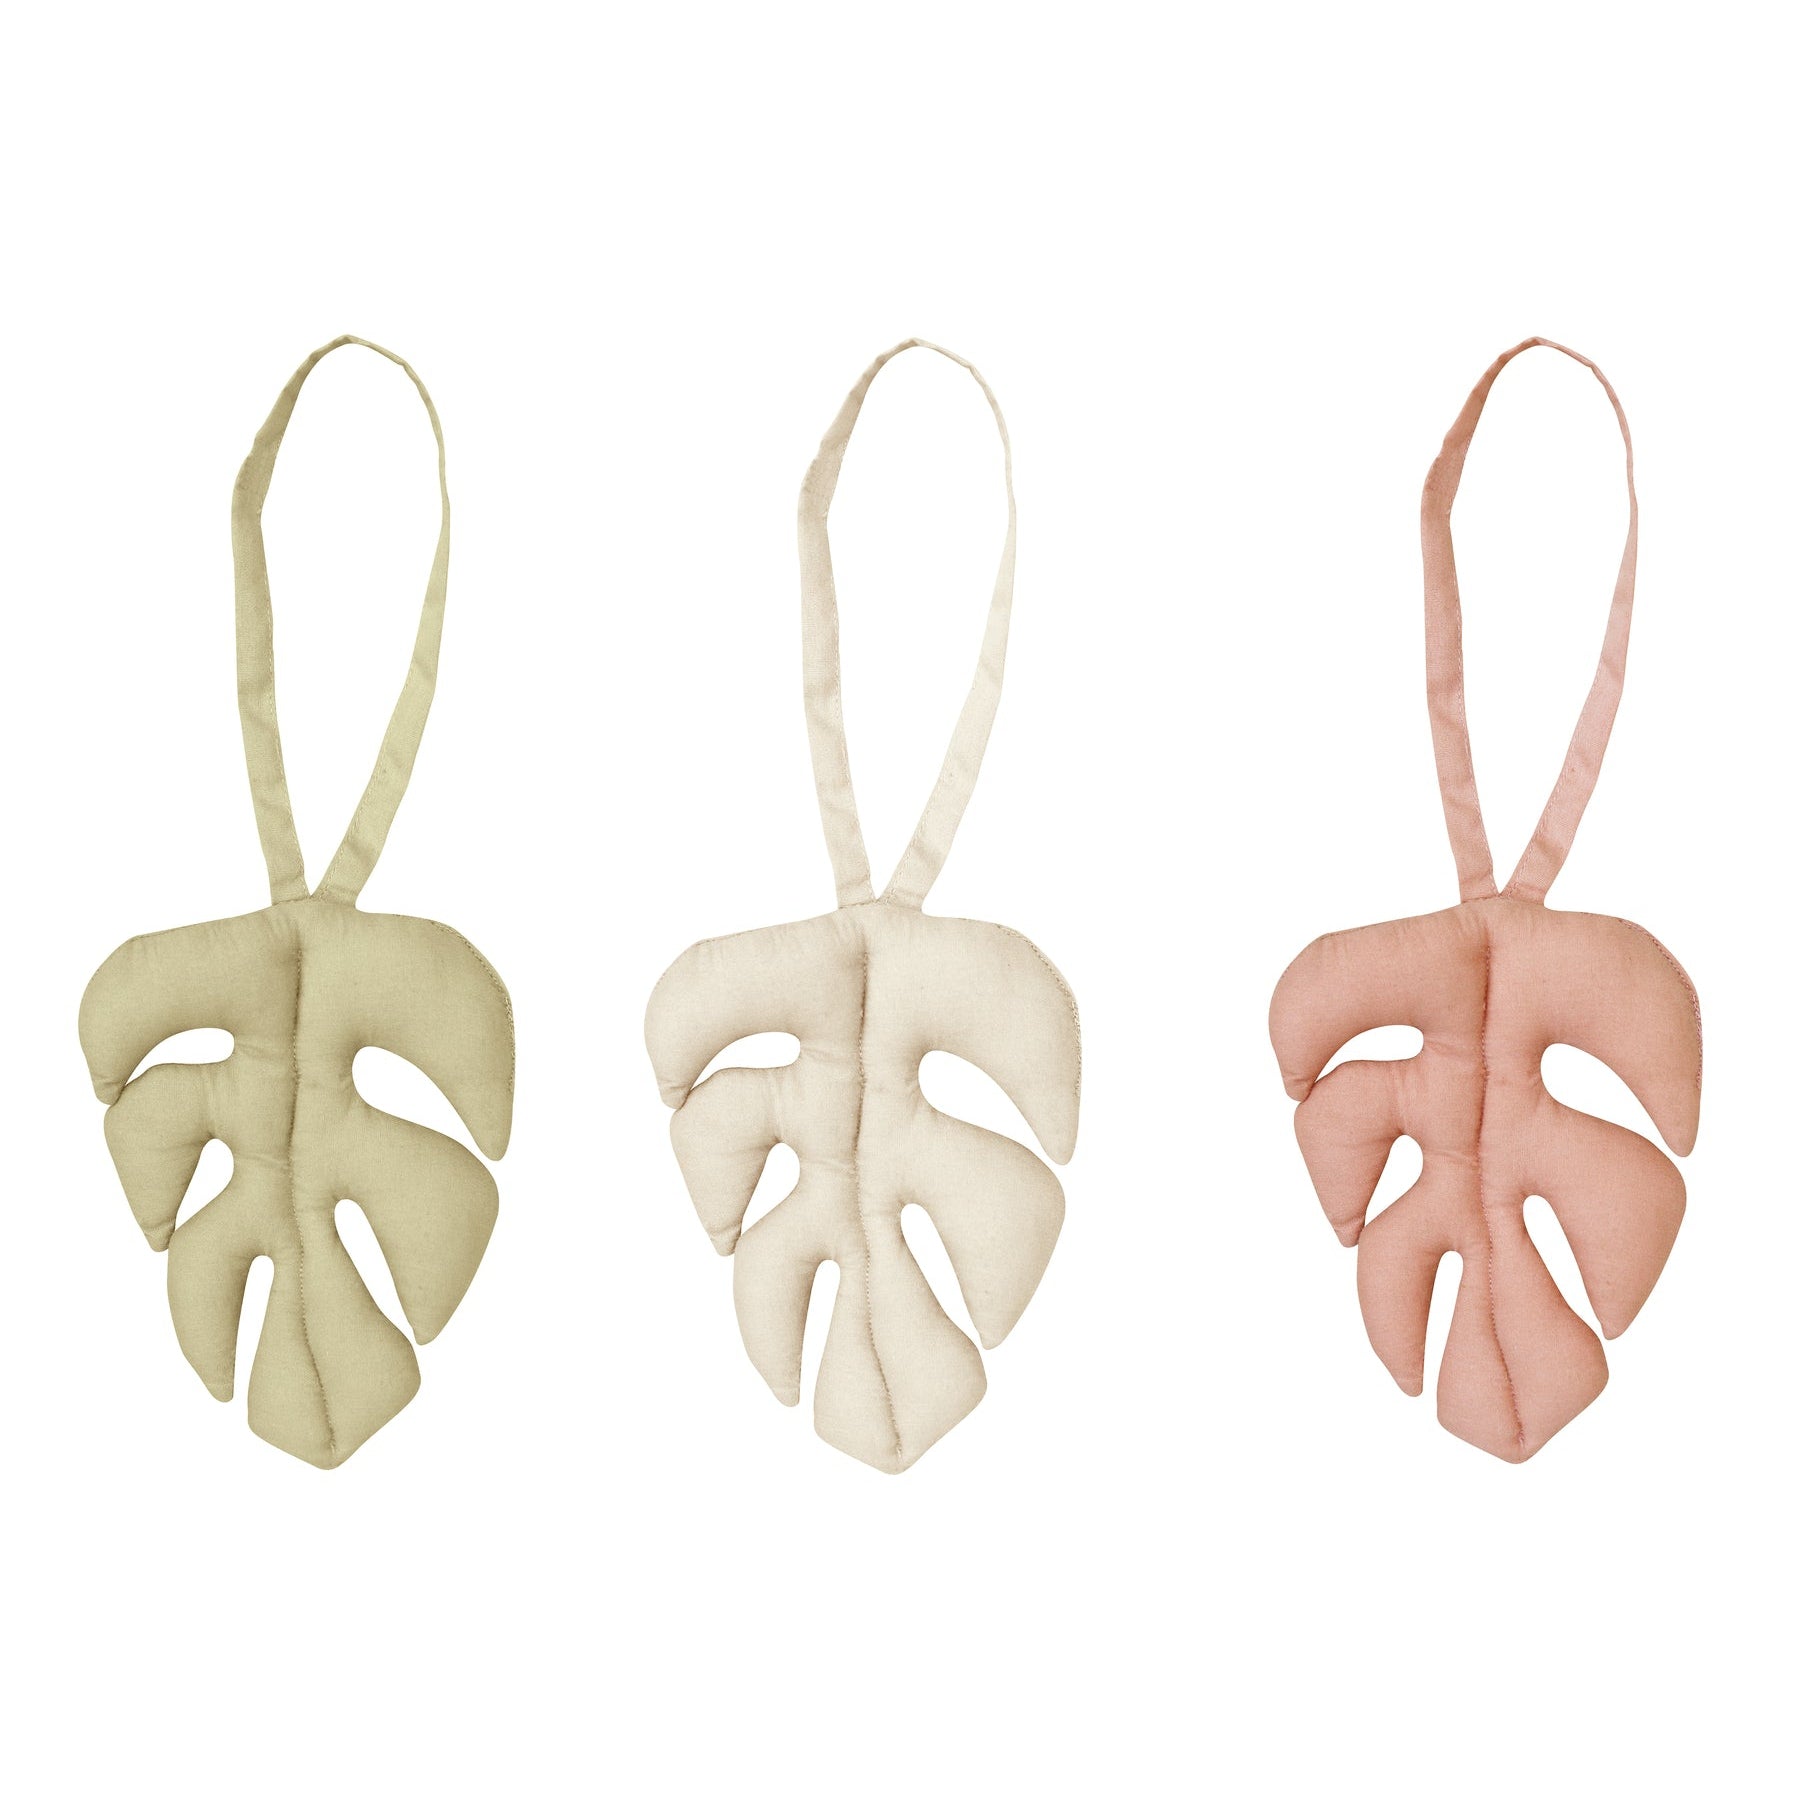 Lorena Canals Monstera Set of 3 Rattle Toy Hangers